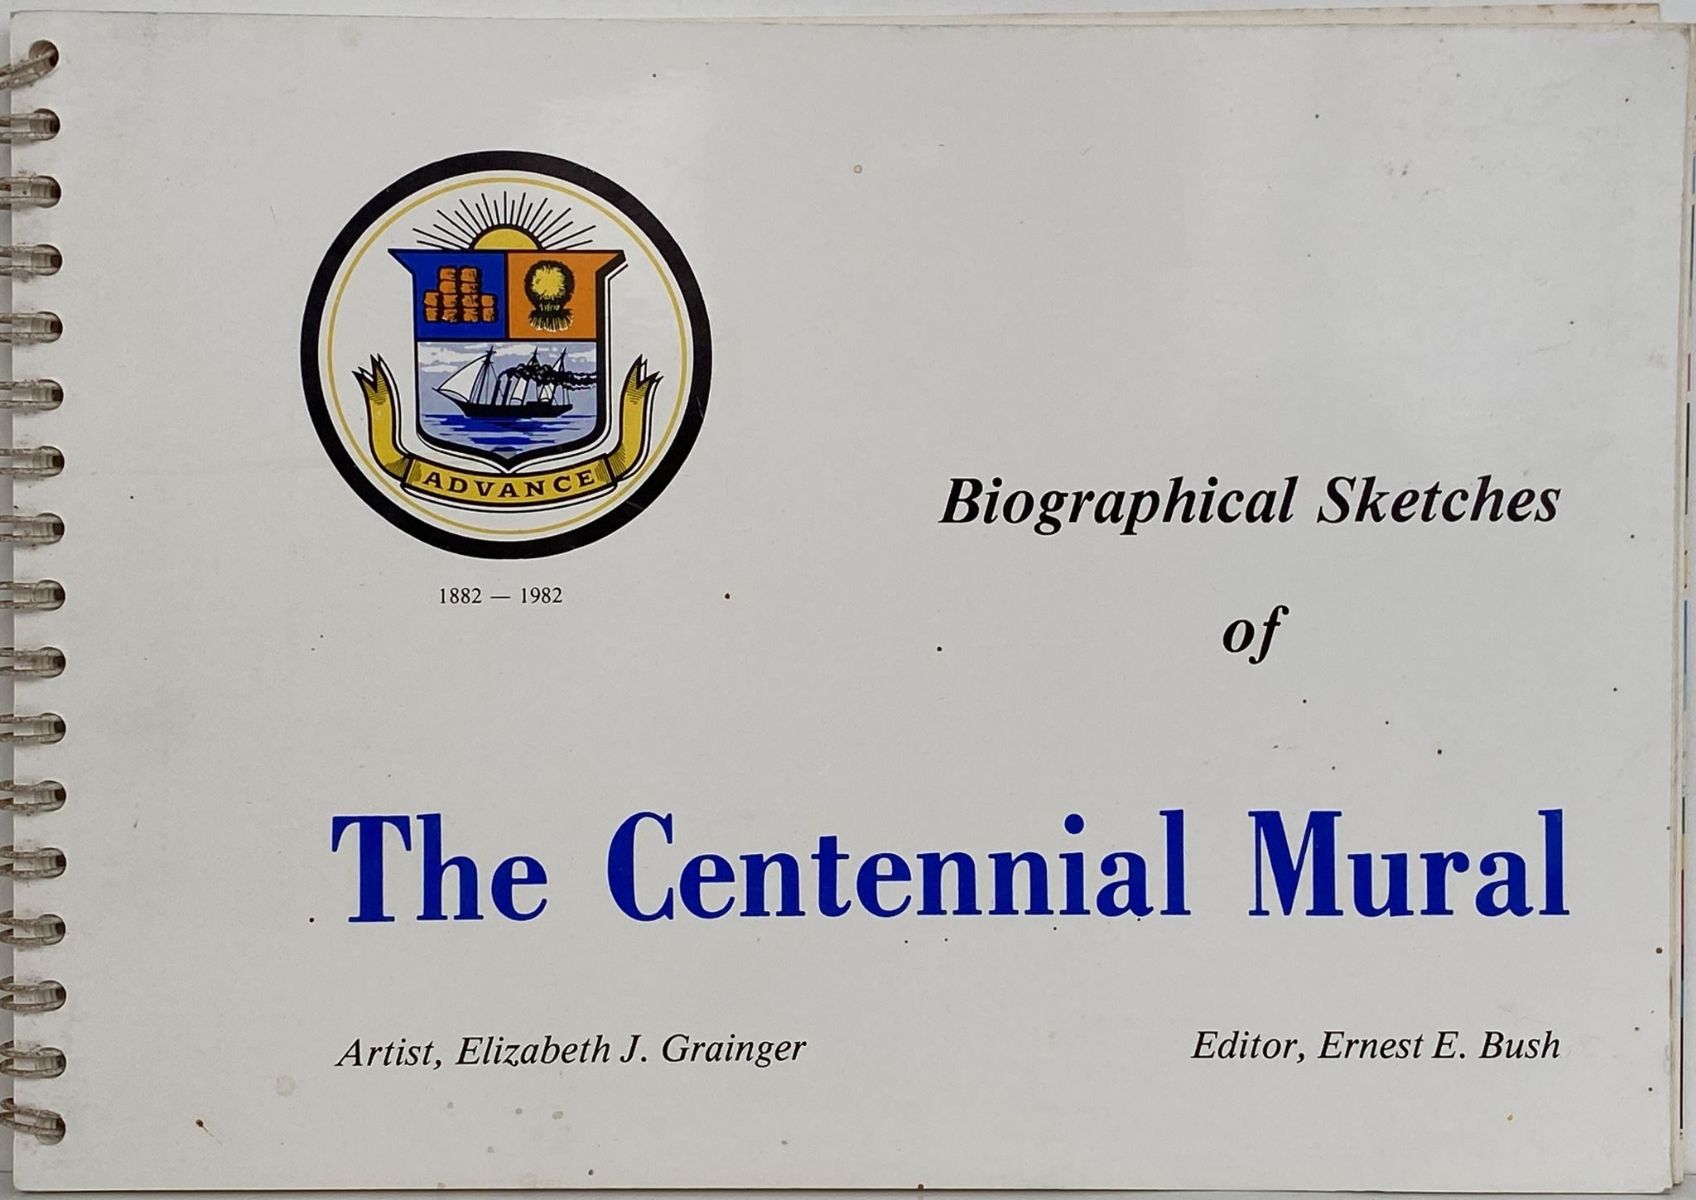 BIOGRAPHICAL SKETCHES OF THE CENTENNIAL MURAL